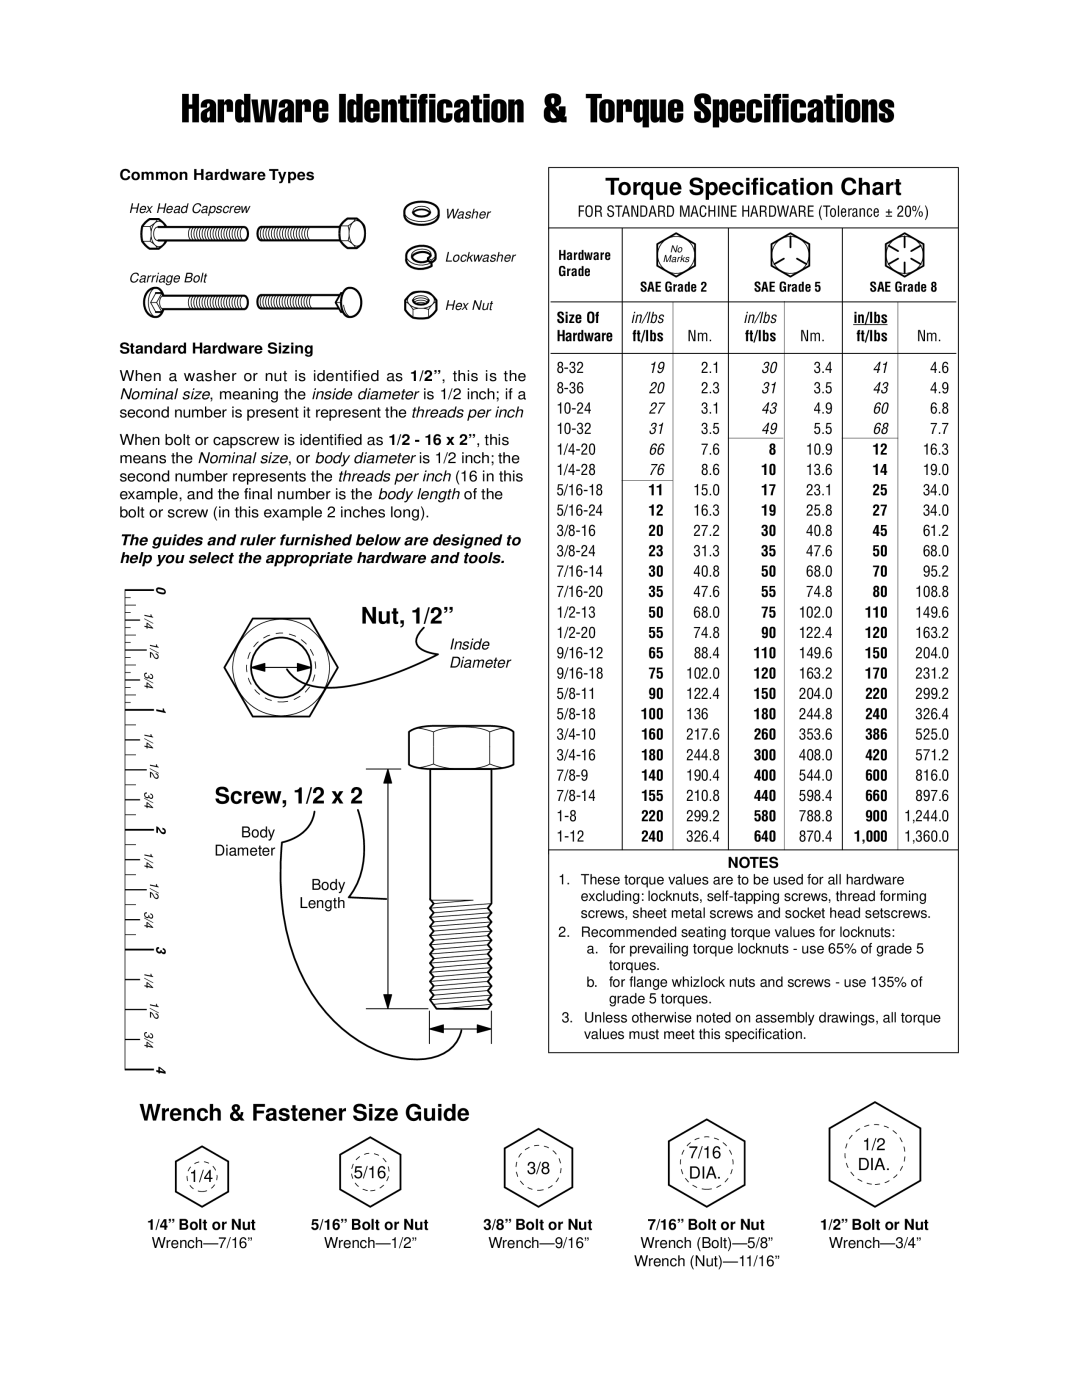 Snapper 4553 Wrench & Fastener Size Guide, Hardware Identification & Torque Specifications, Torque Specification Chart 